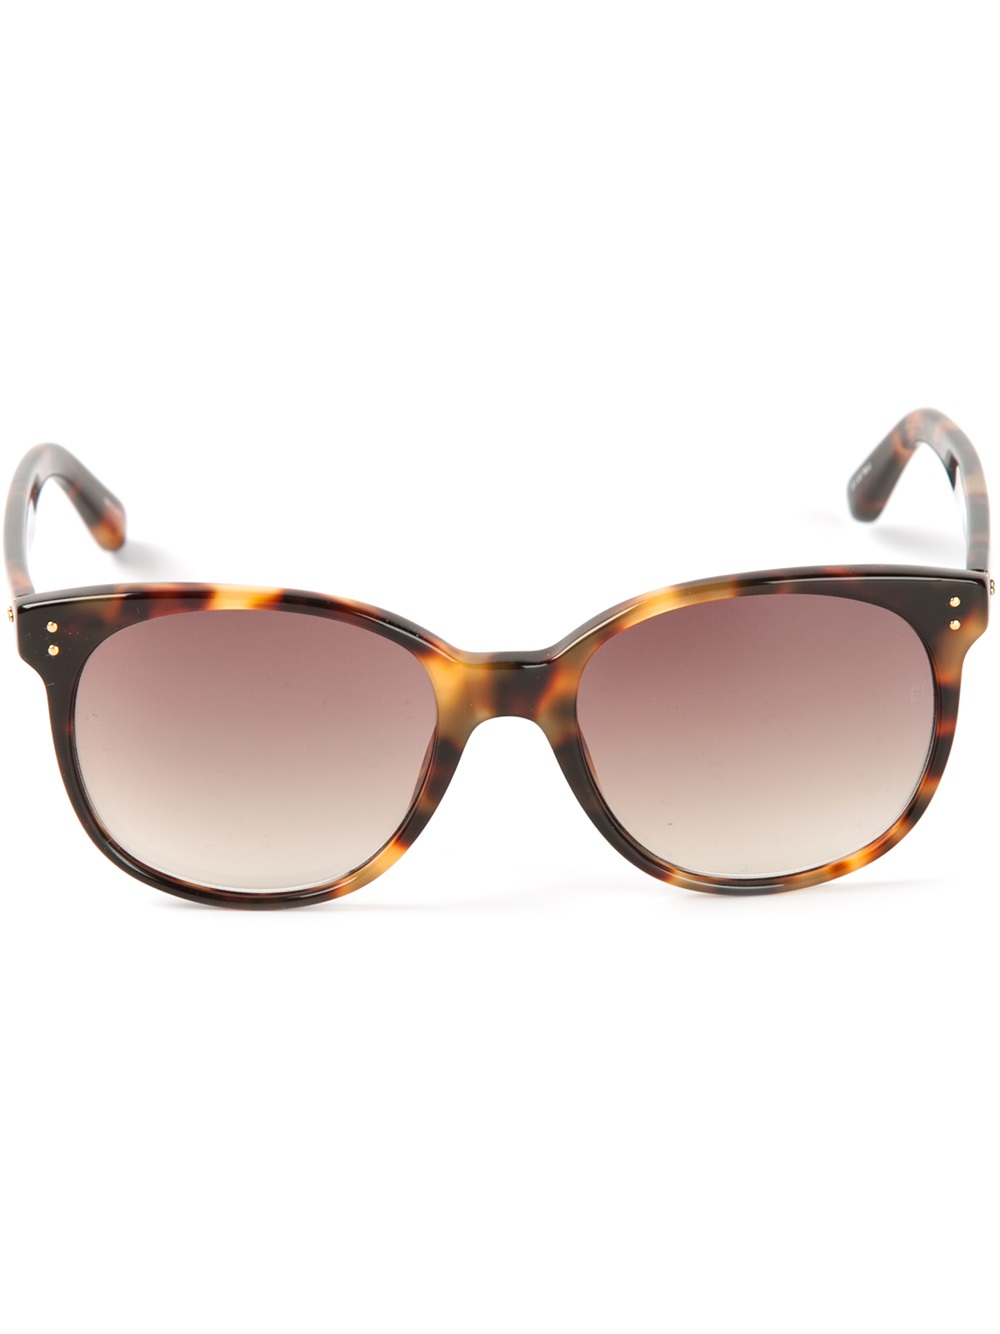 Linda farrow luxe Oval Sunglasses in Brown | Lyst